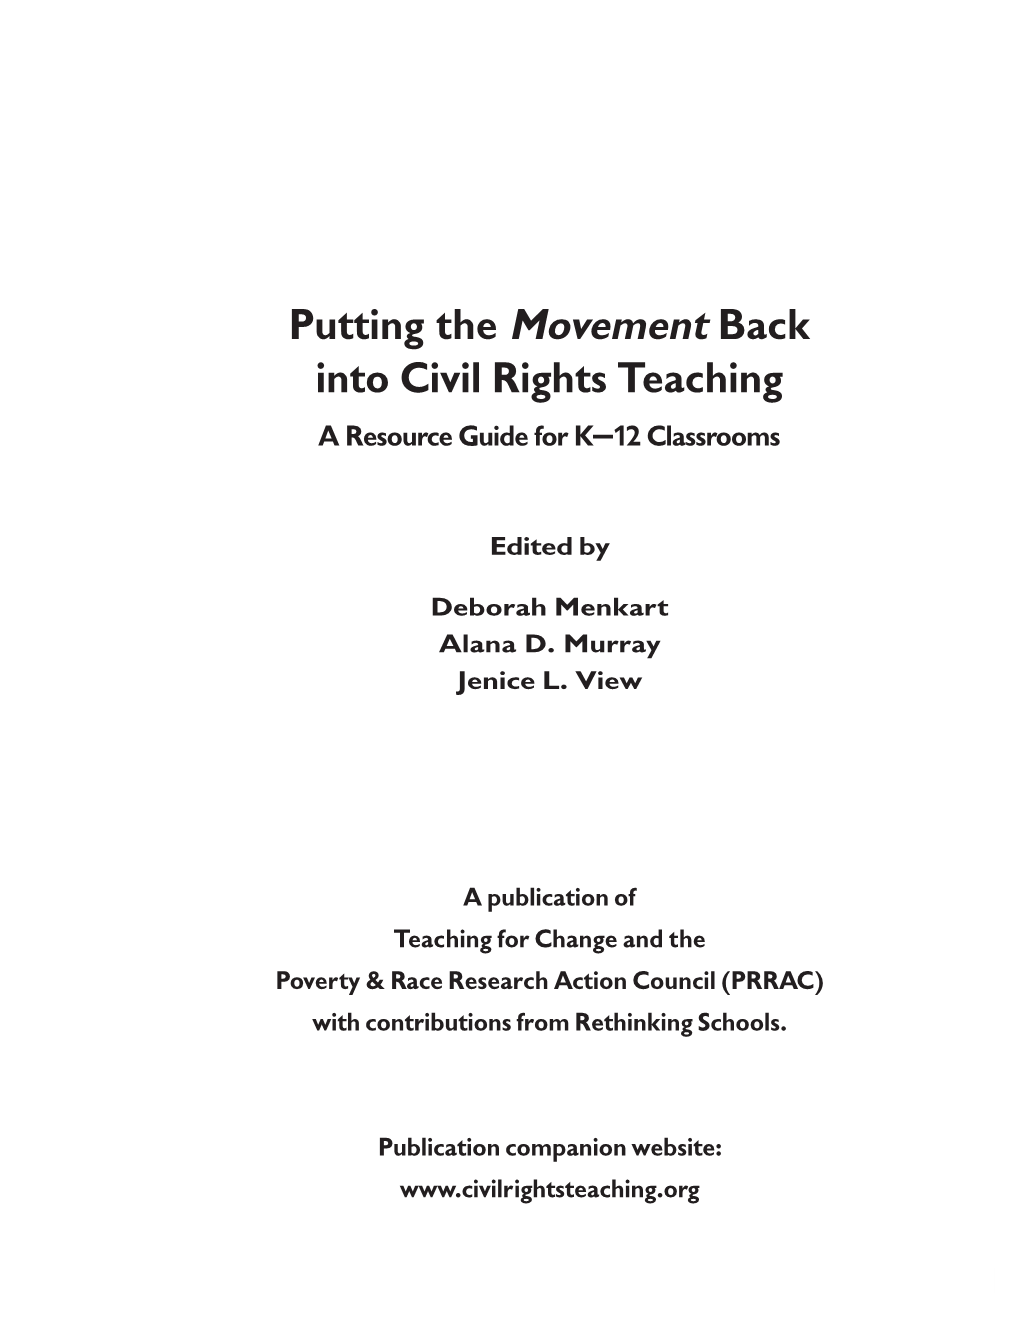 Putting the Movement Back Into Civil Rights Teaching a Resource Guide for K–12 Classrooms